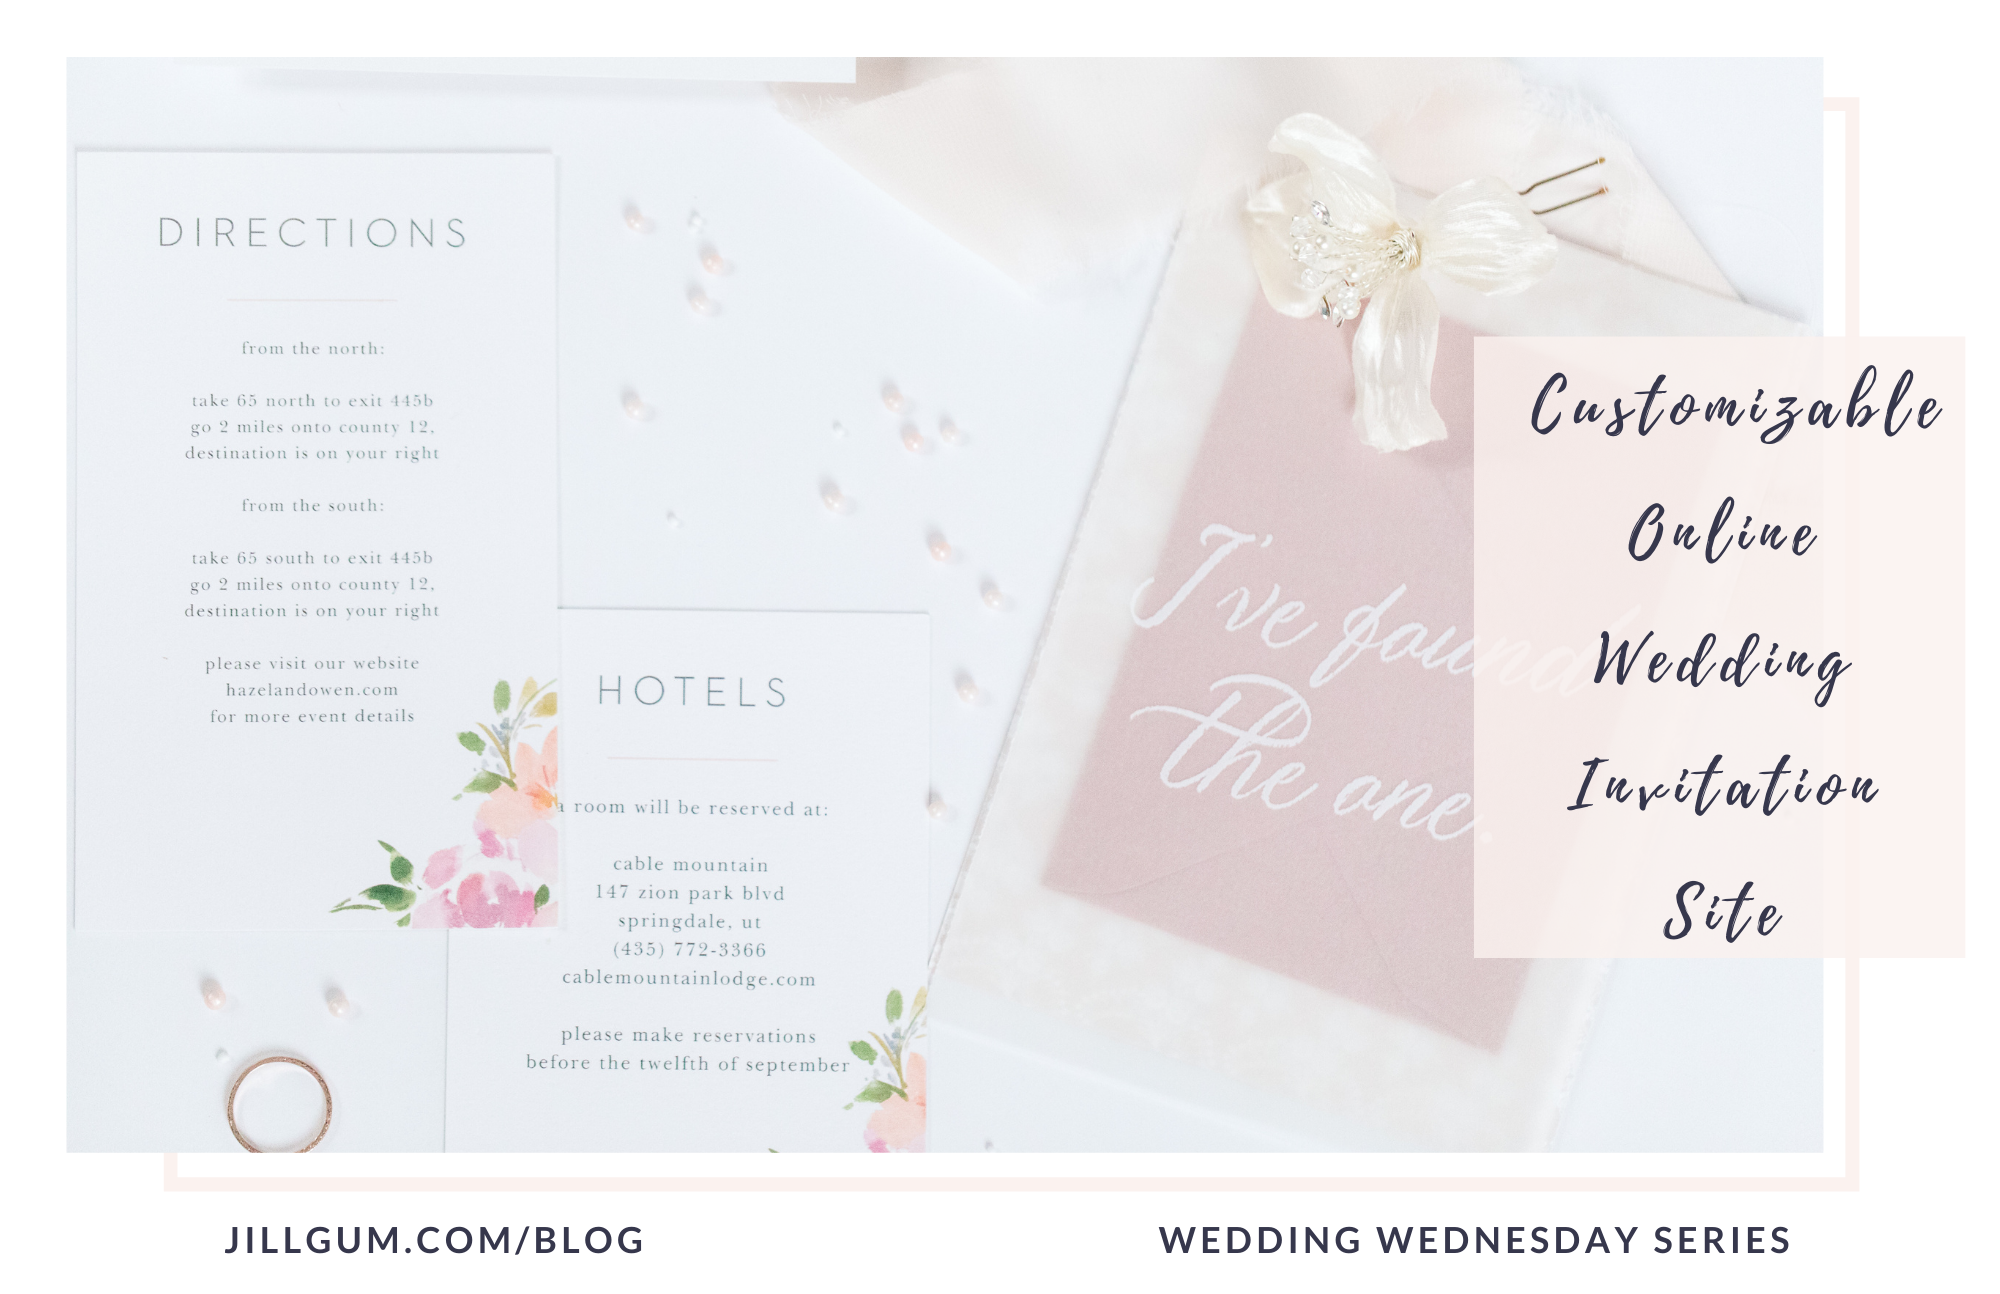 Online Wedding Guest Books and Invitations